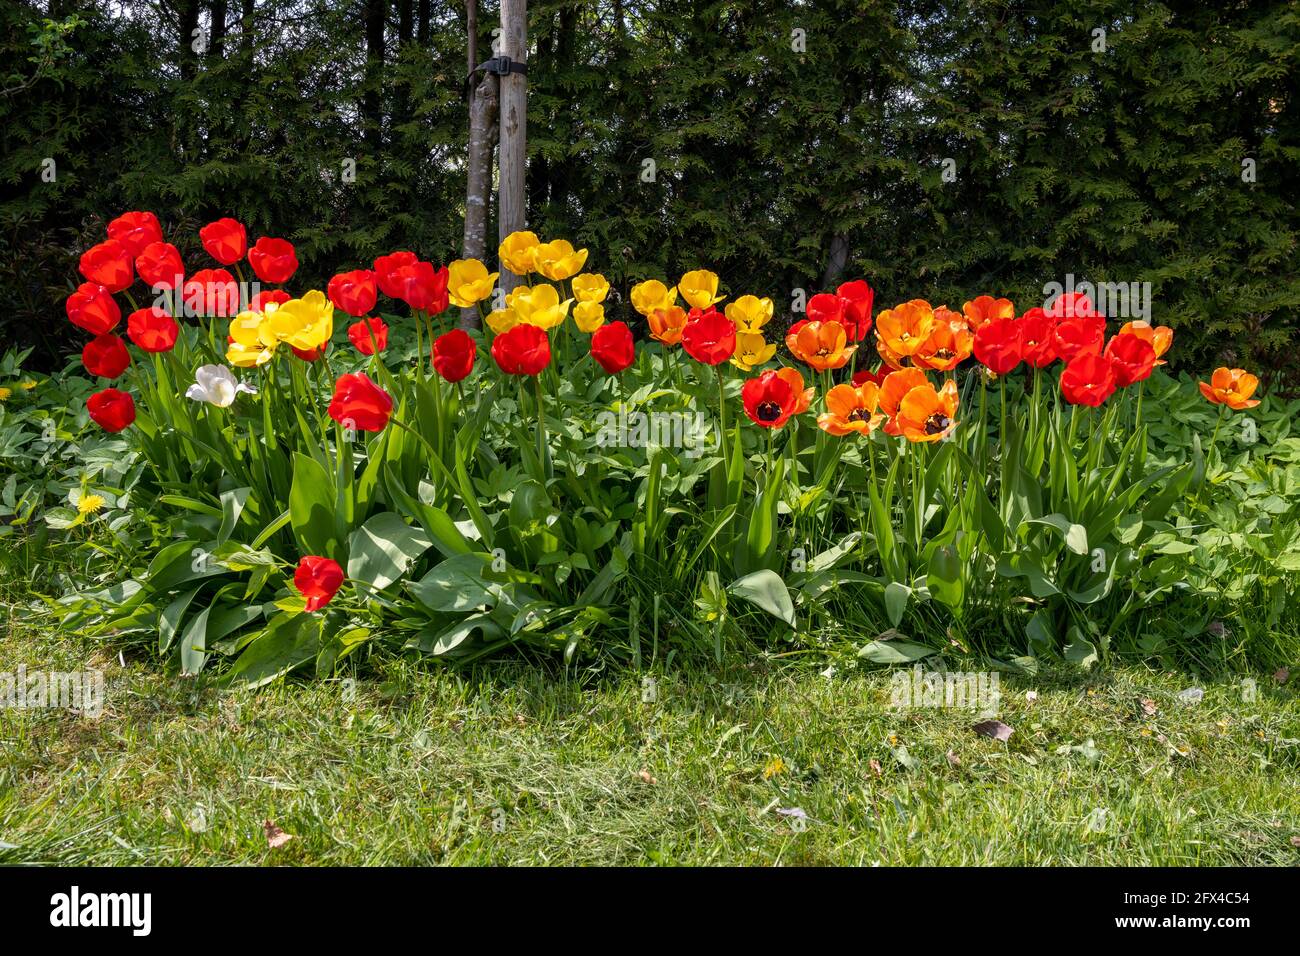 A closeup picture of red and yellow tulip flowers in a garden. Blurry bushes and blue sky in the background Stock Photo